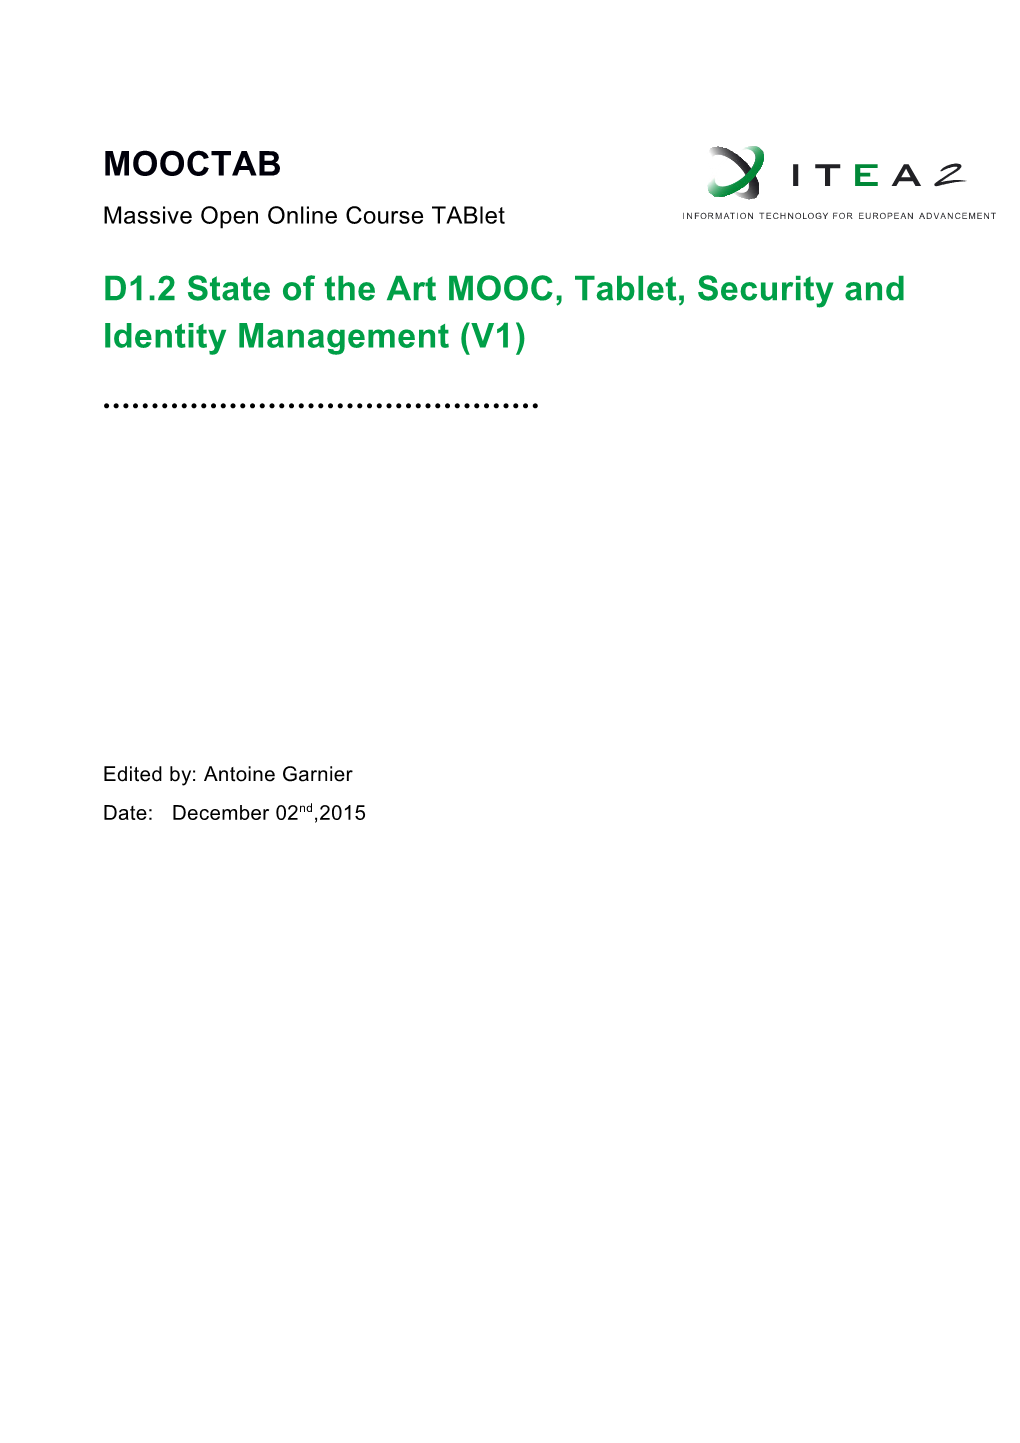 State of the Art MOOC, Tablet, Security and Identity Management